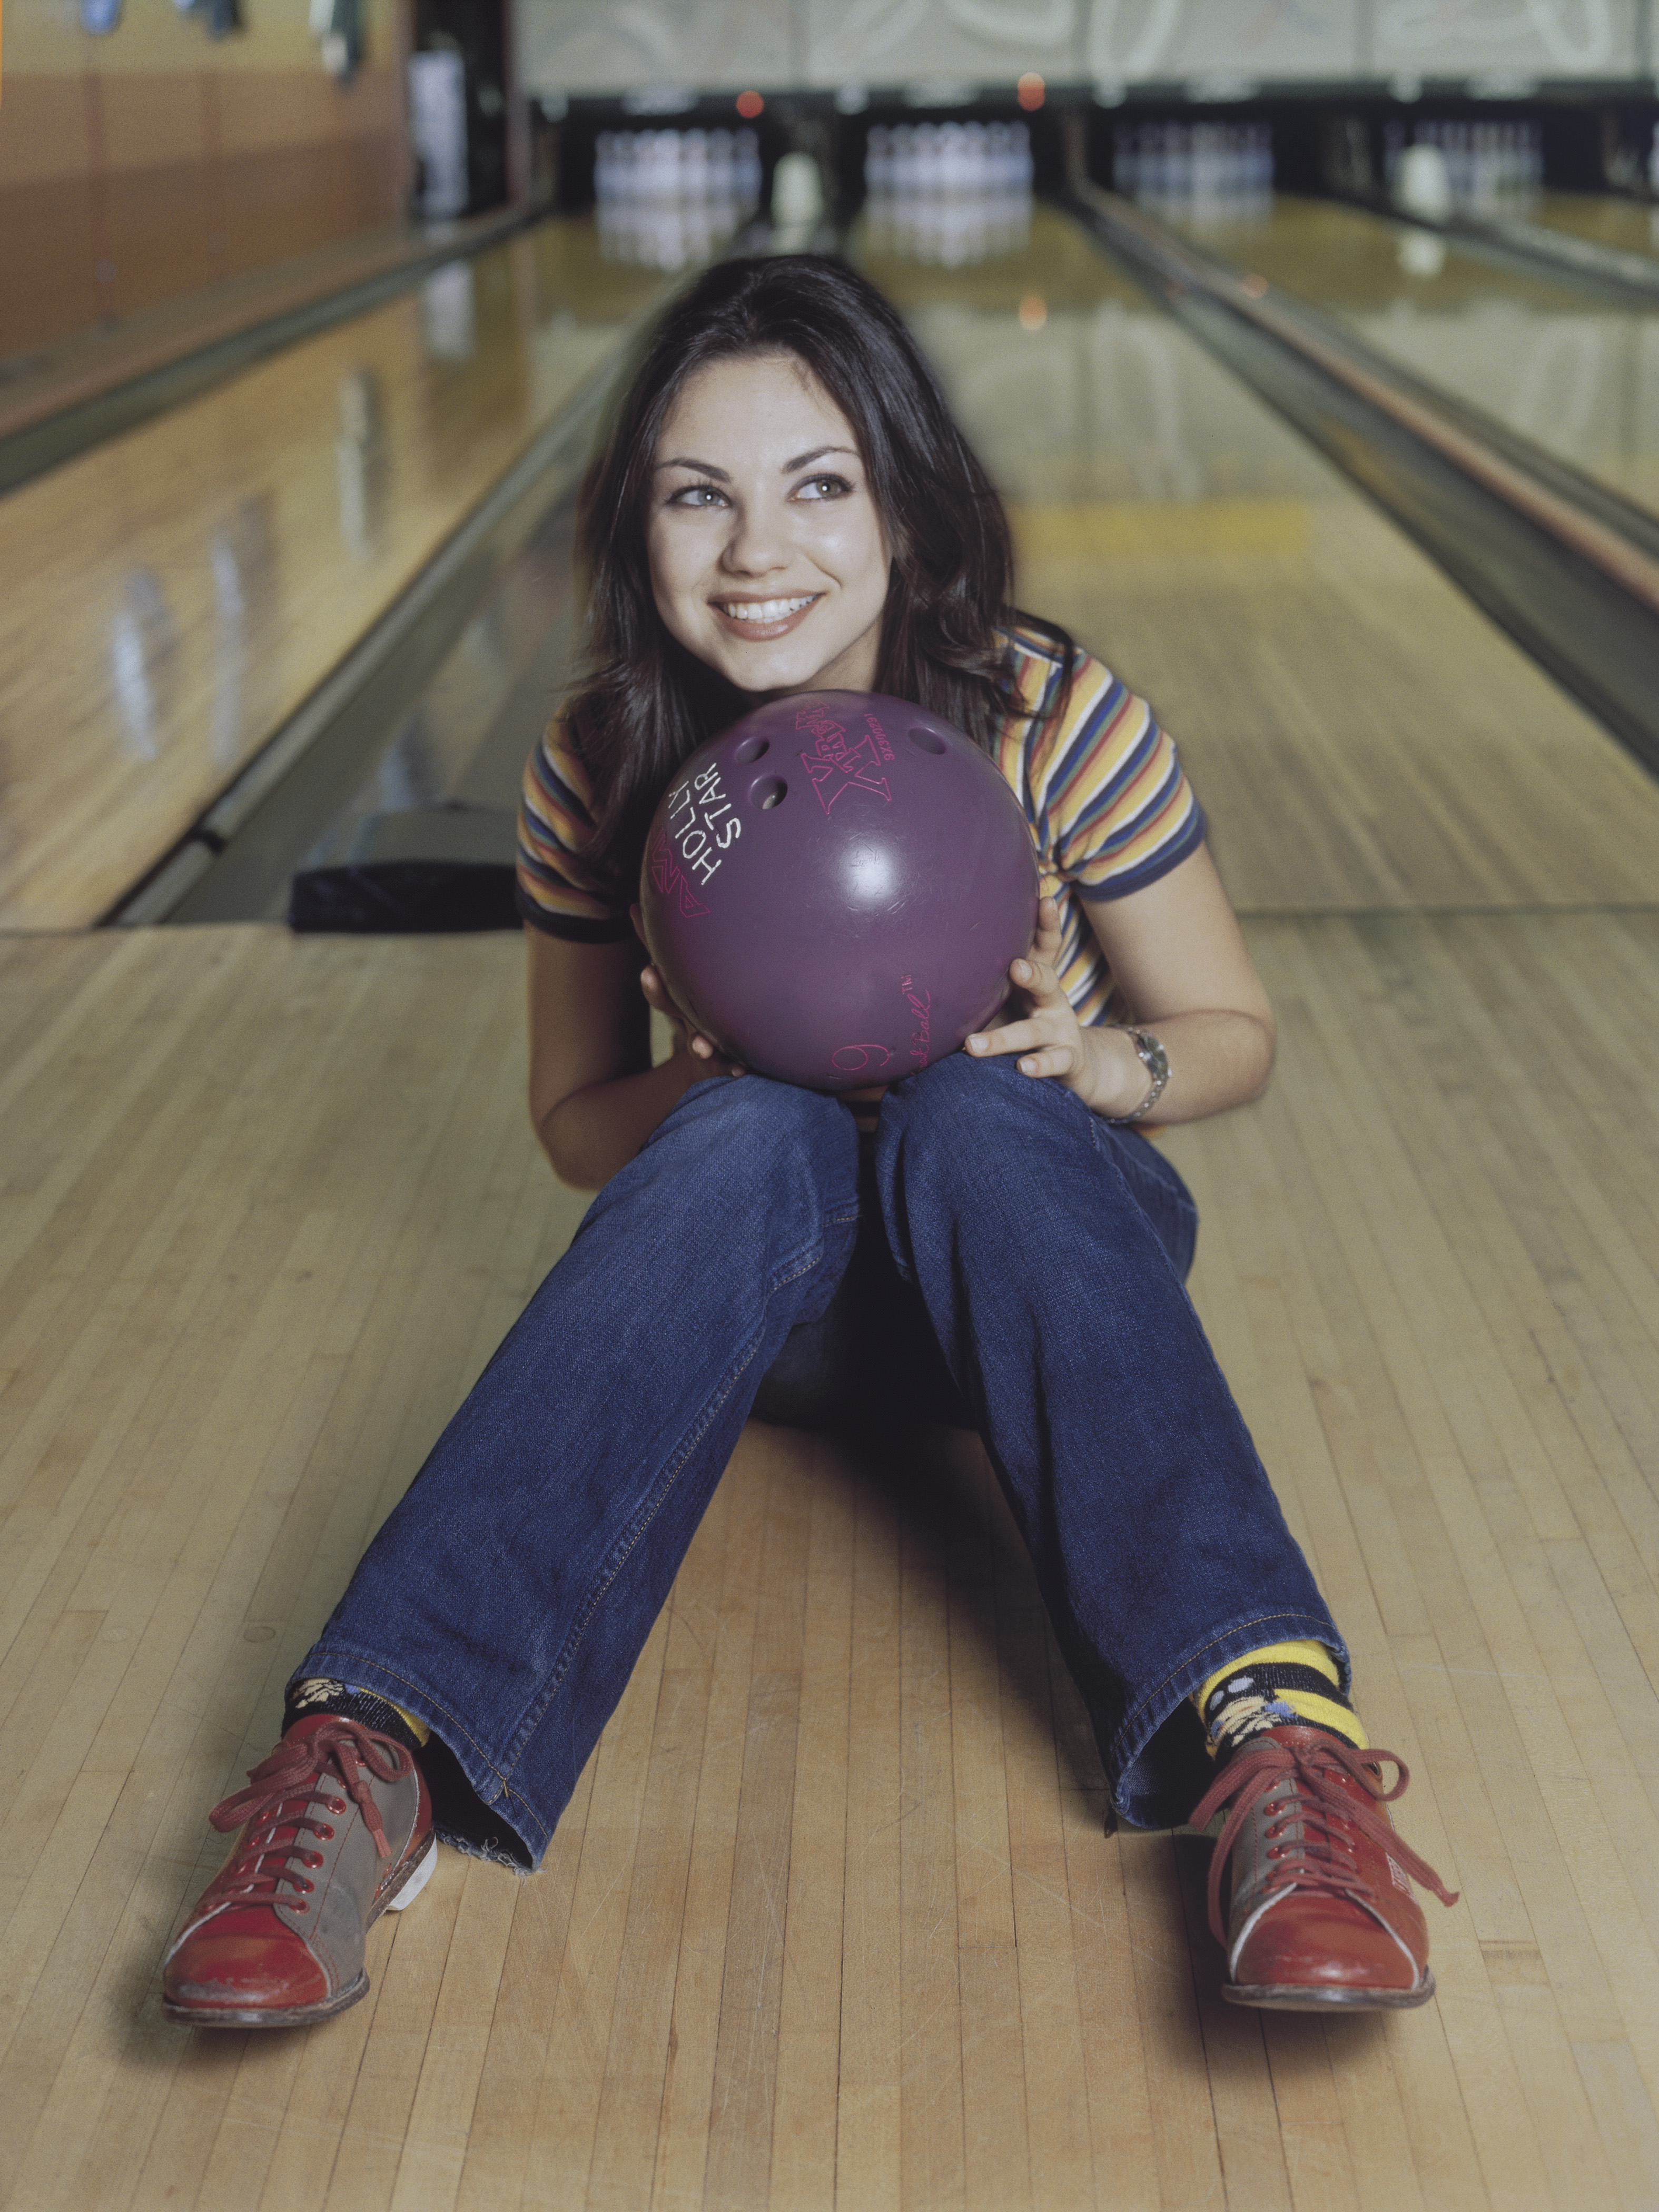 Actress Mila Kunis poses for a portrait at a bowling alley in Hollywood, California, in 2006 | Source: Getty Images